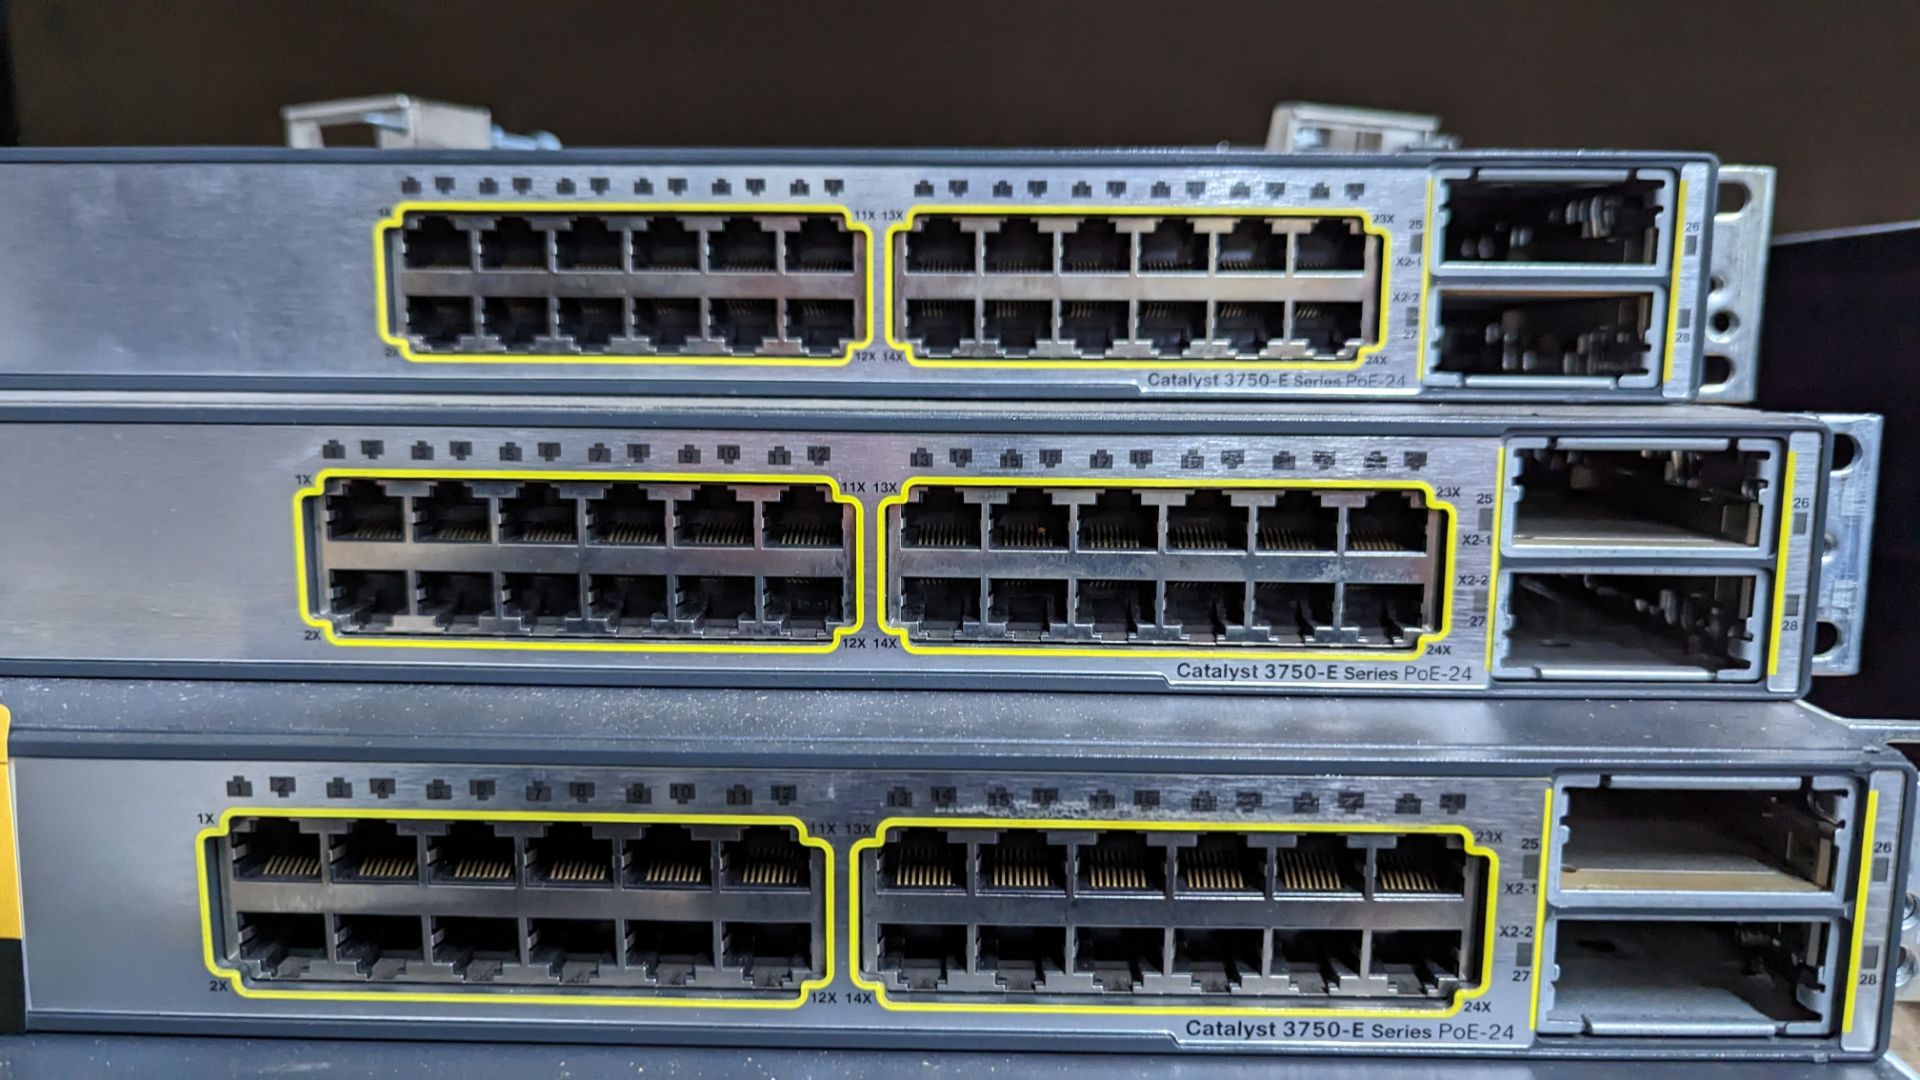 4 off Cisco Catalyst 3750-E Series 24 port switches - Image 5 of 9